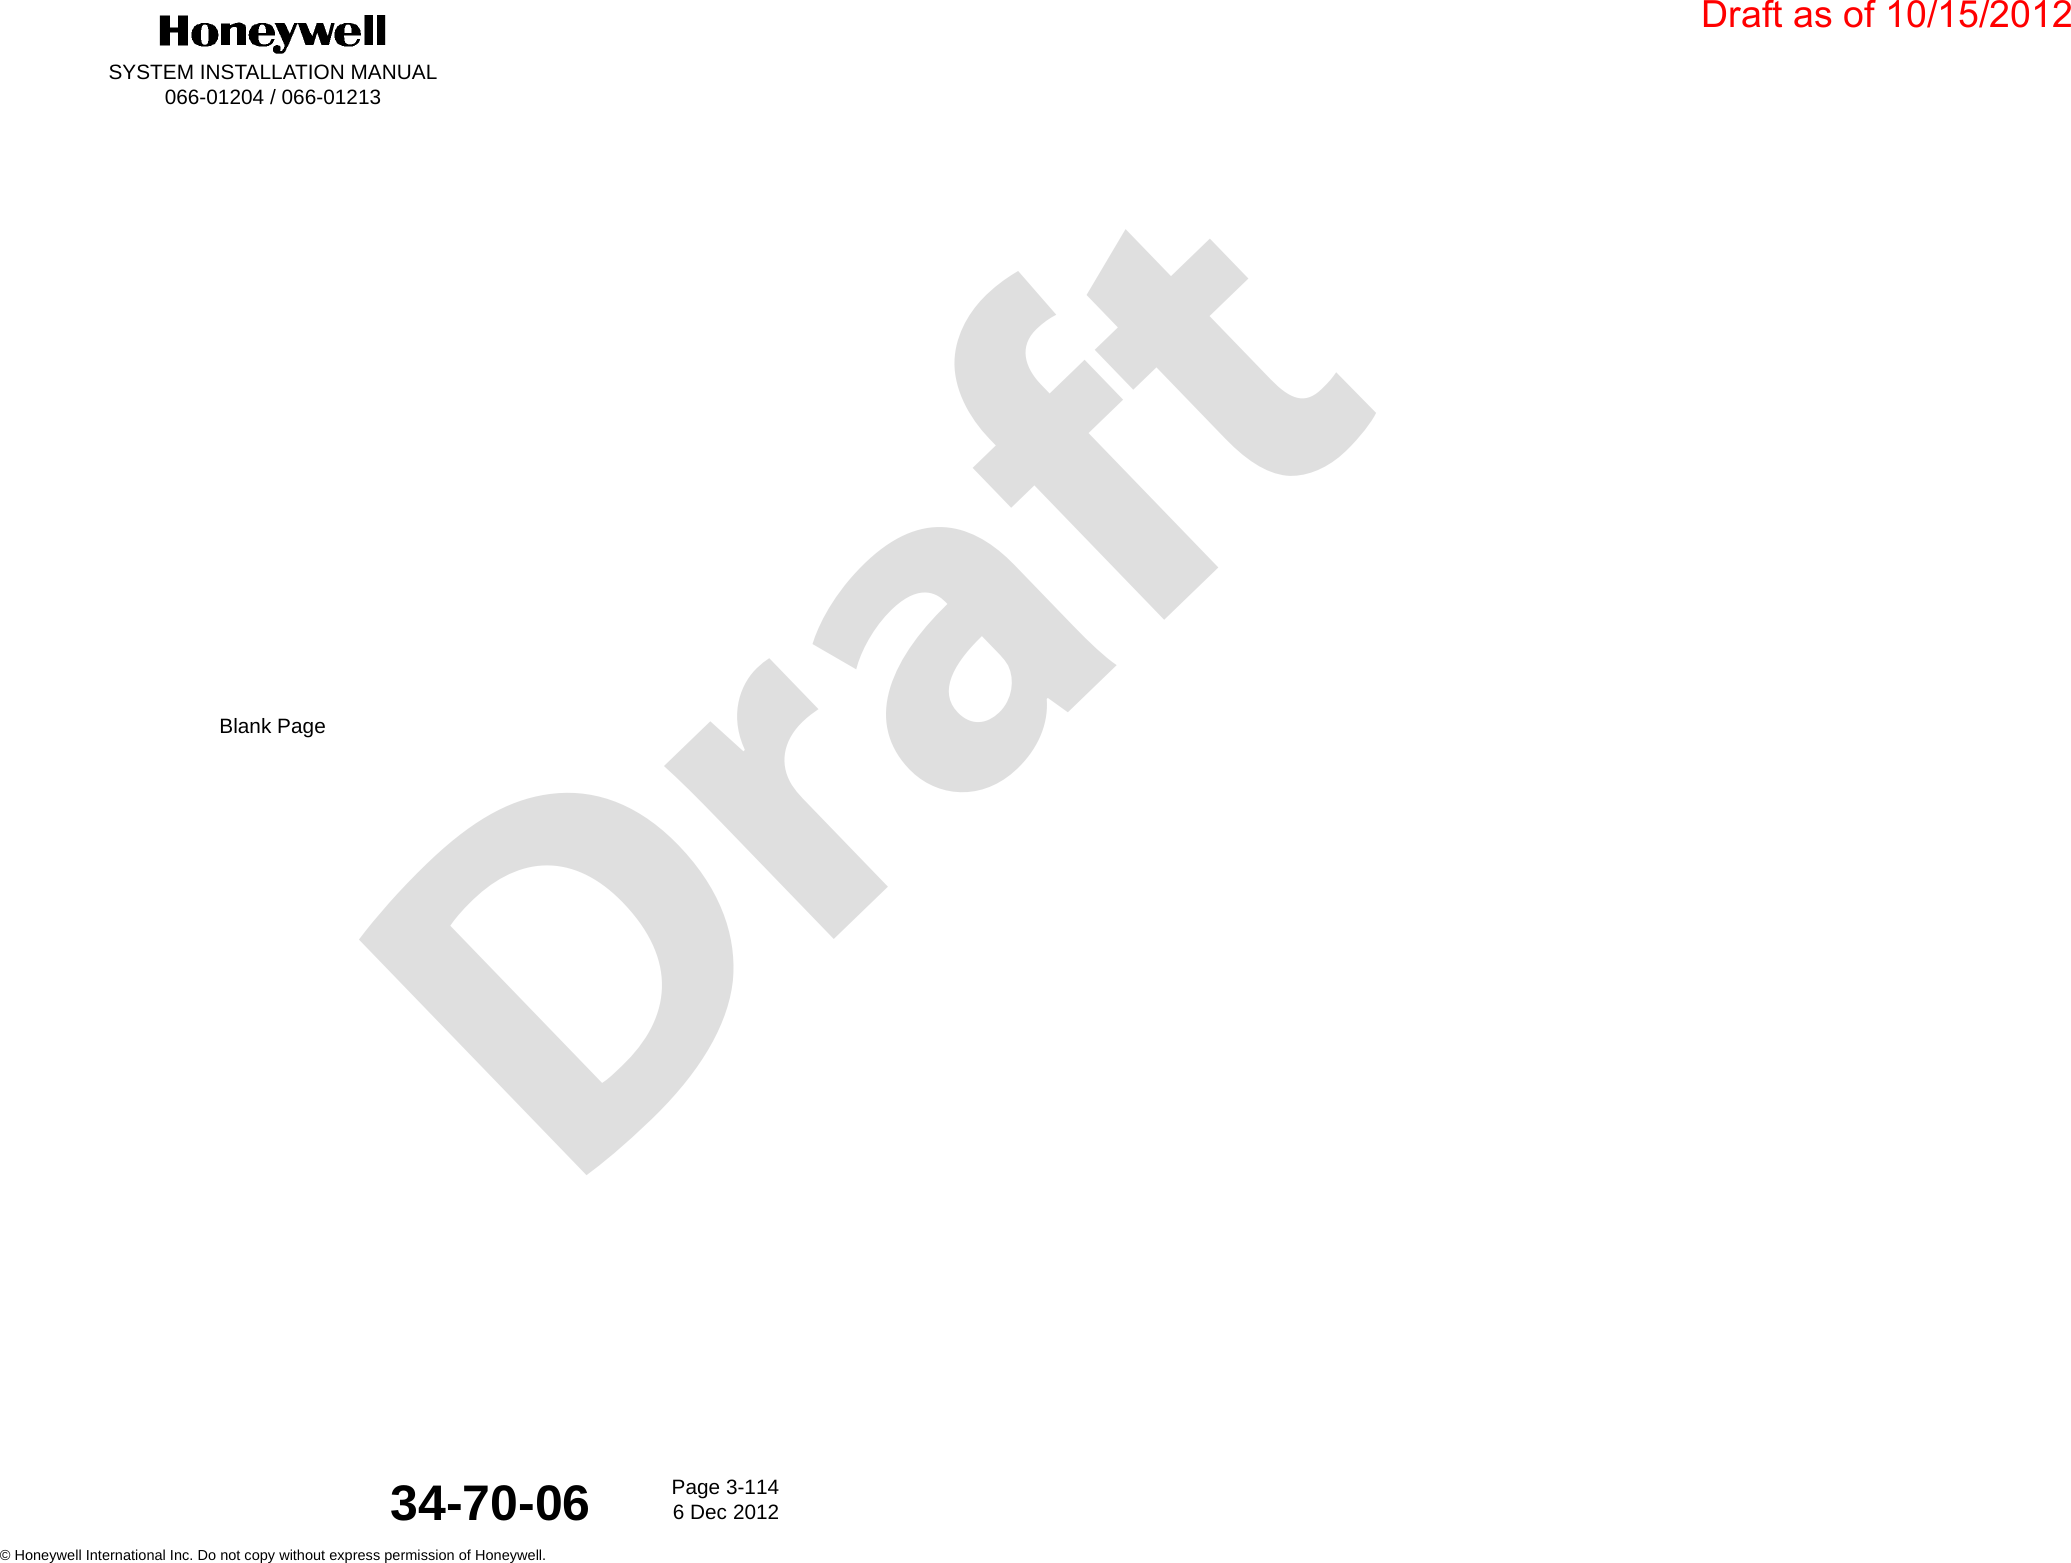 DraftSYSTEM INSTALLATION MANUAL066-01204 / 066-01213Page 3-1146 Dec 2012© Honeywell International Inc. Do not copy without express permission of Honeywell.34-70-06Blank PageDraft as of 10/15/2012